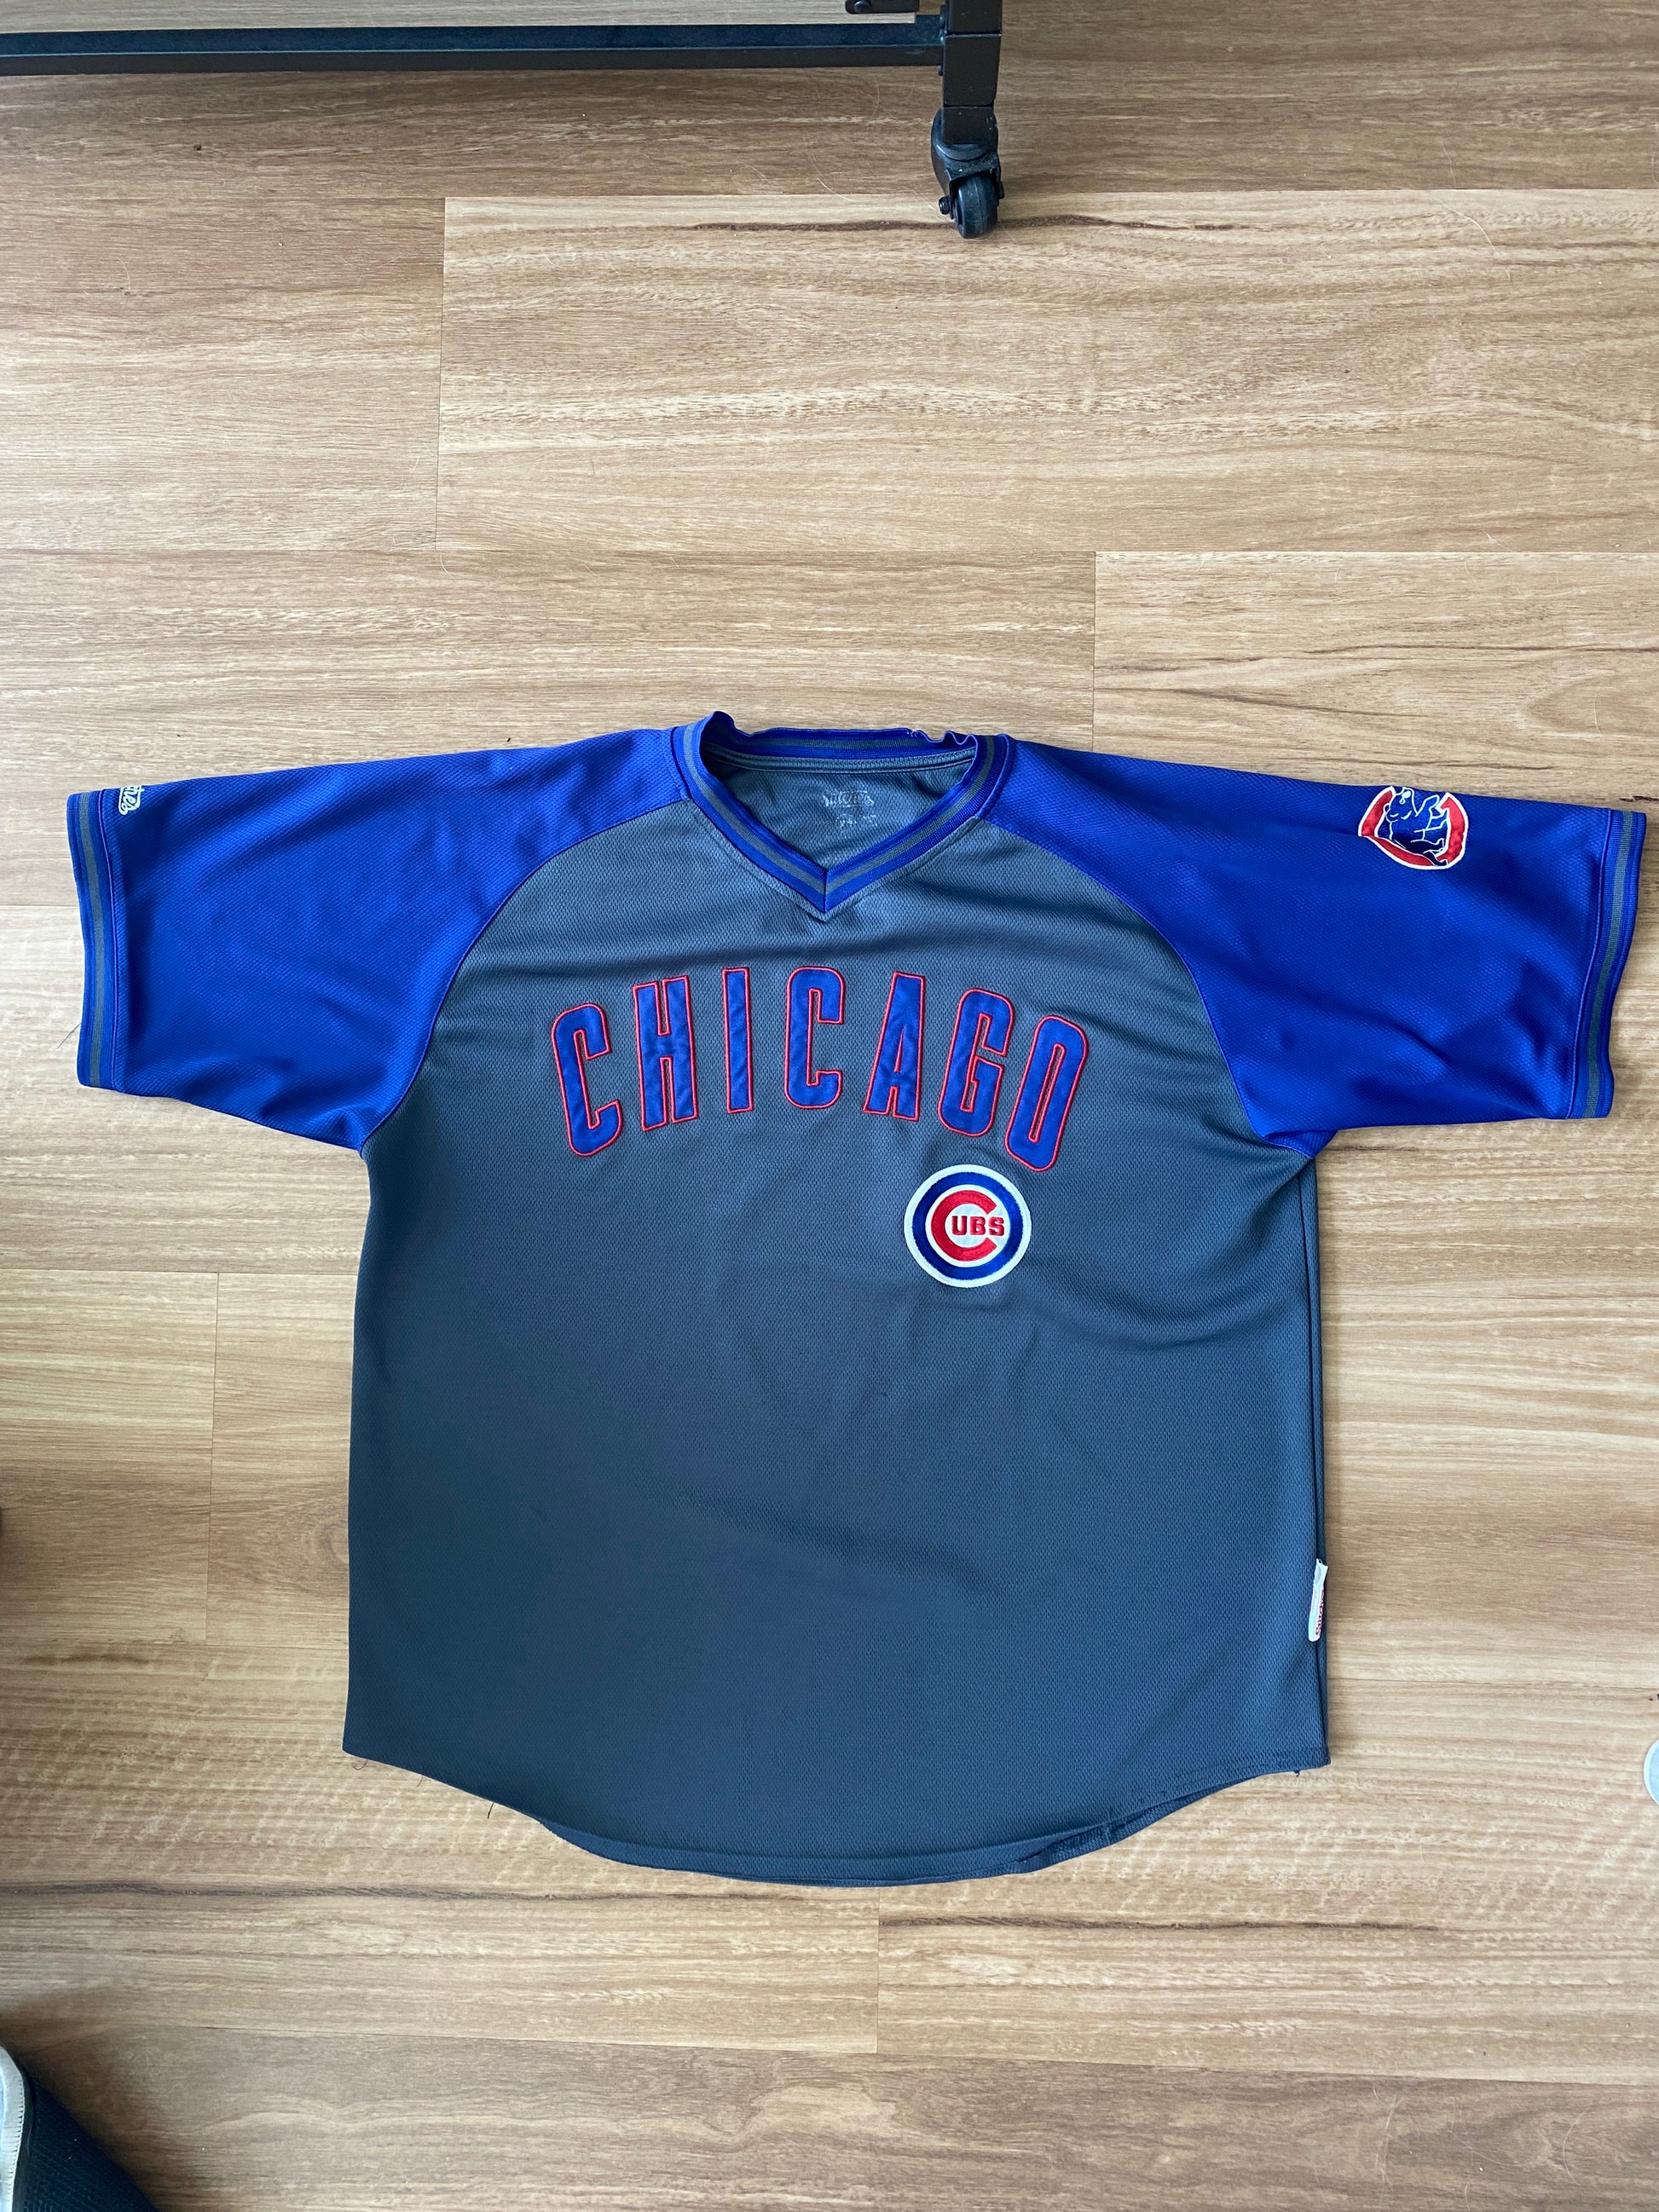 cubs jerseys by year